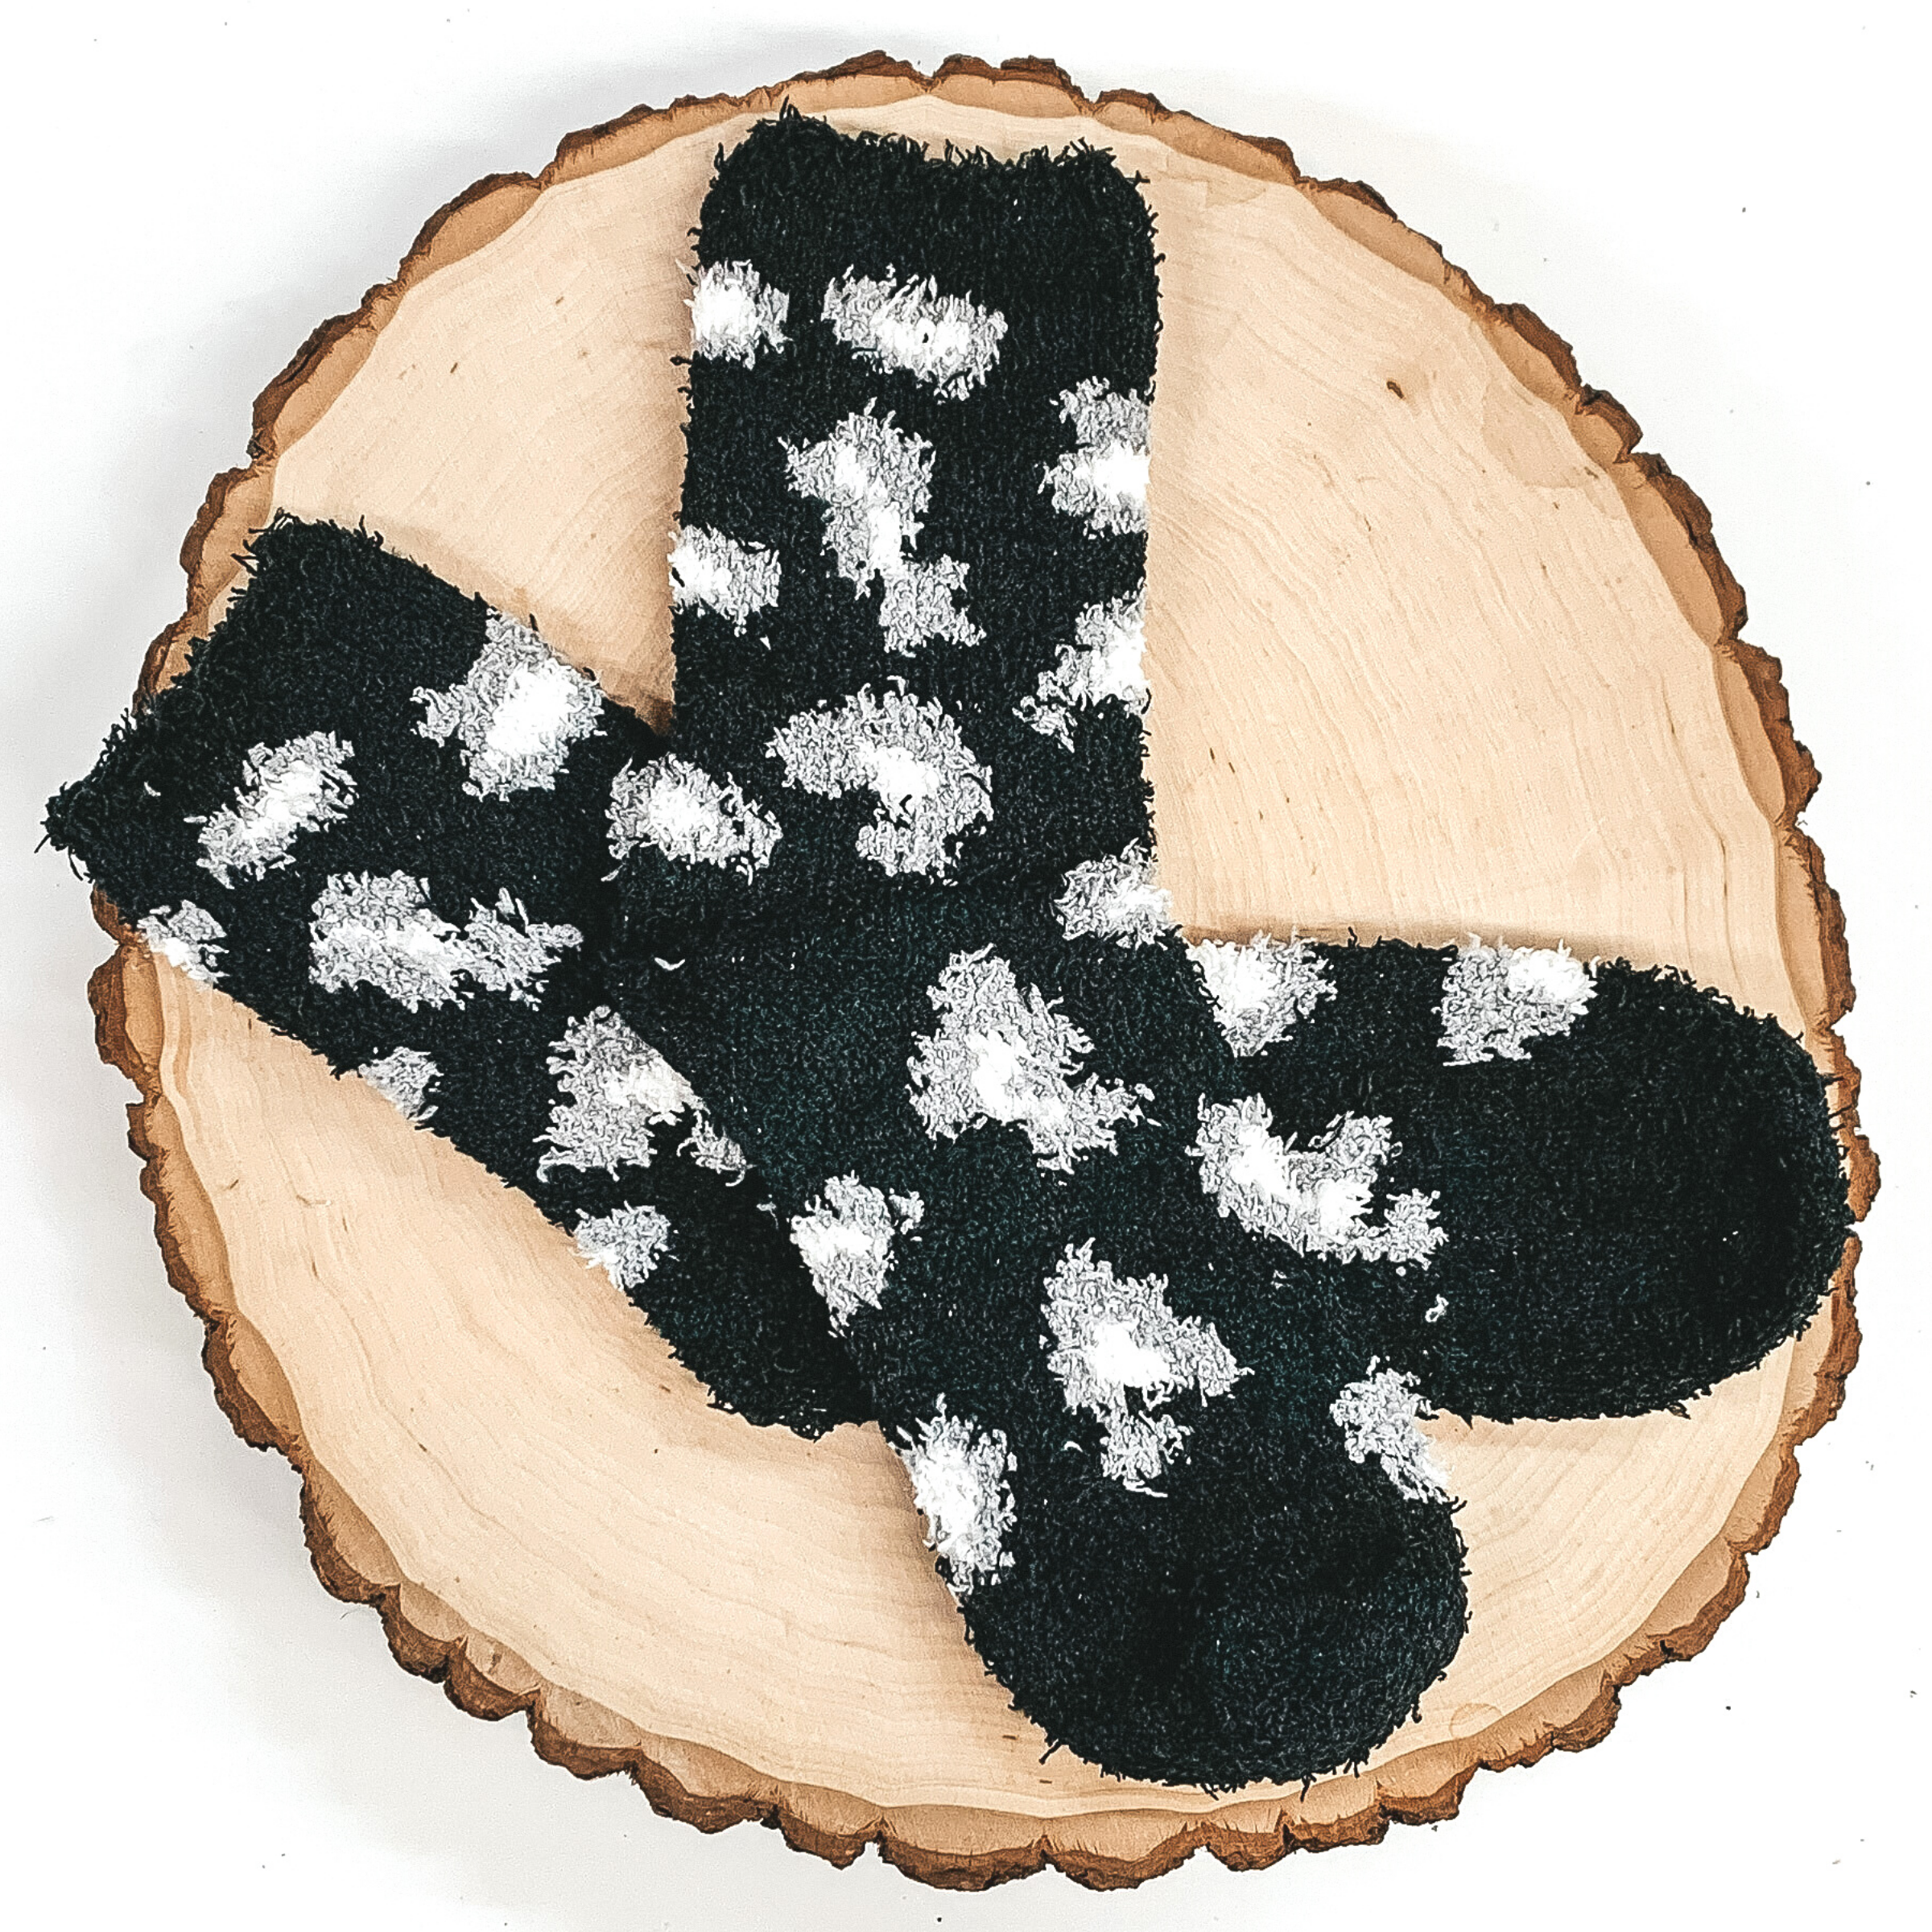 Fuzzy black socks with white and grey leopard print. These socks are pictured laying on a piece of wood that is on a white background.